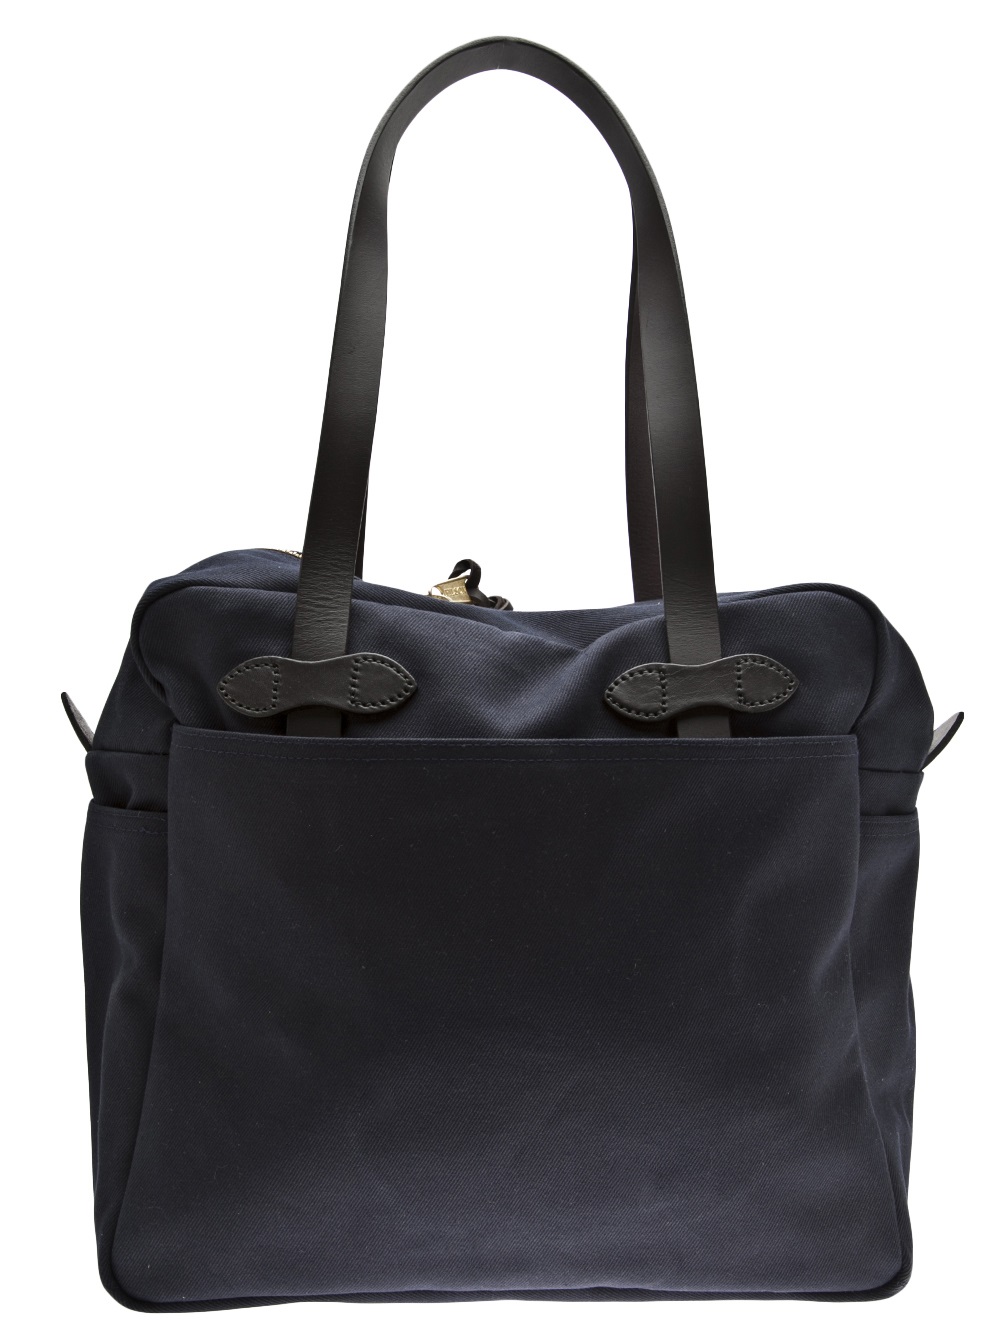 Filson Tote Bags For Men For Sale | IUCN Water